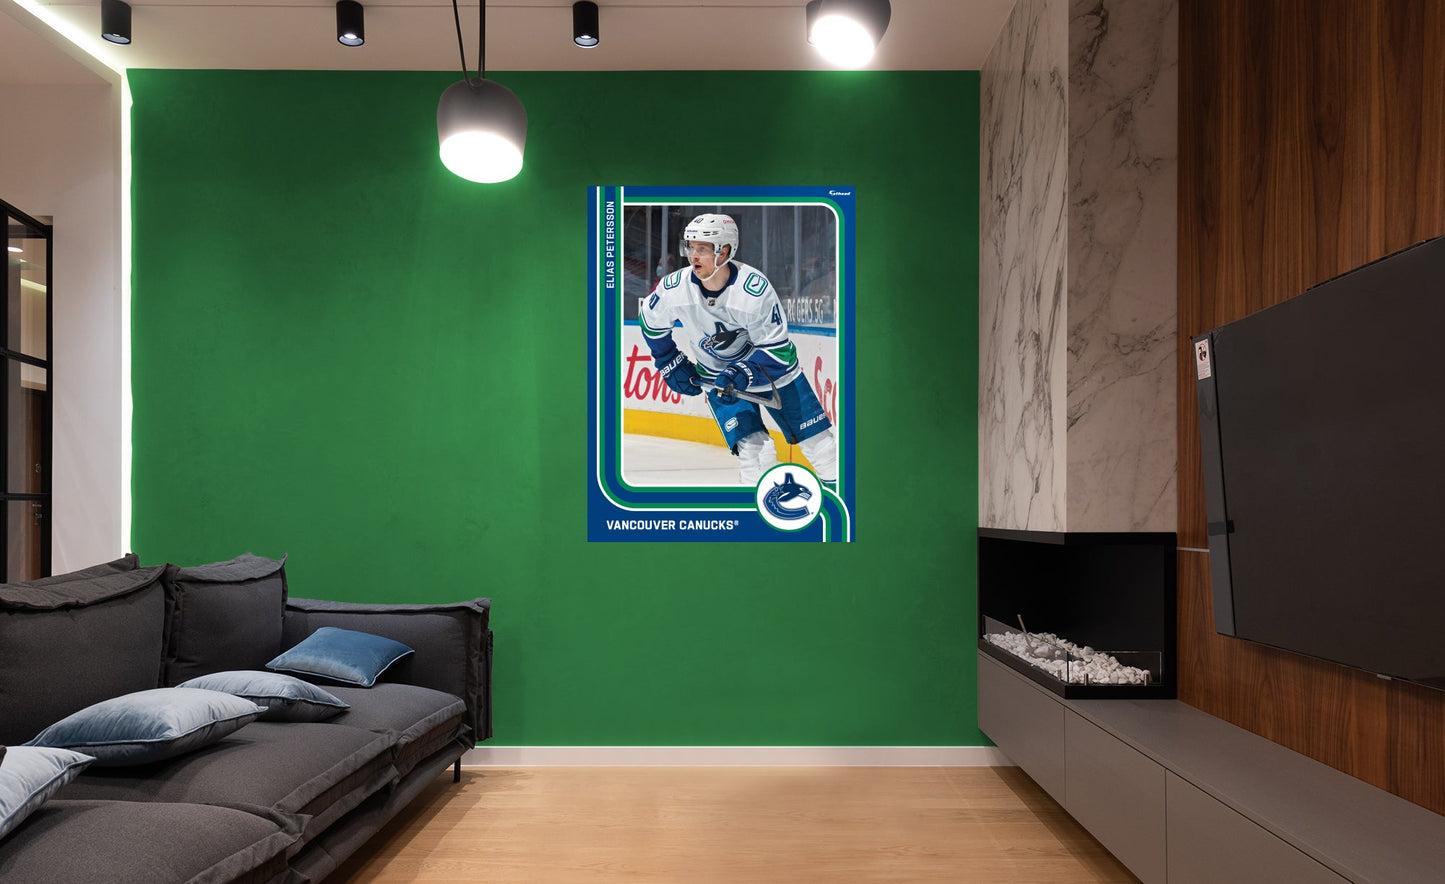 Vancouver Canucks: Elias Pettersson Poster - Officially Licensed NHL Removable Adhesive Decal